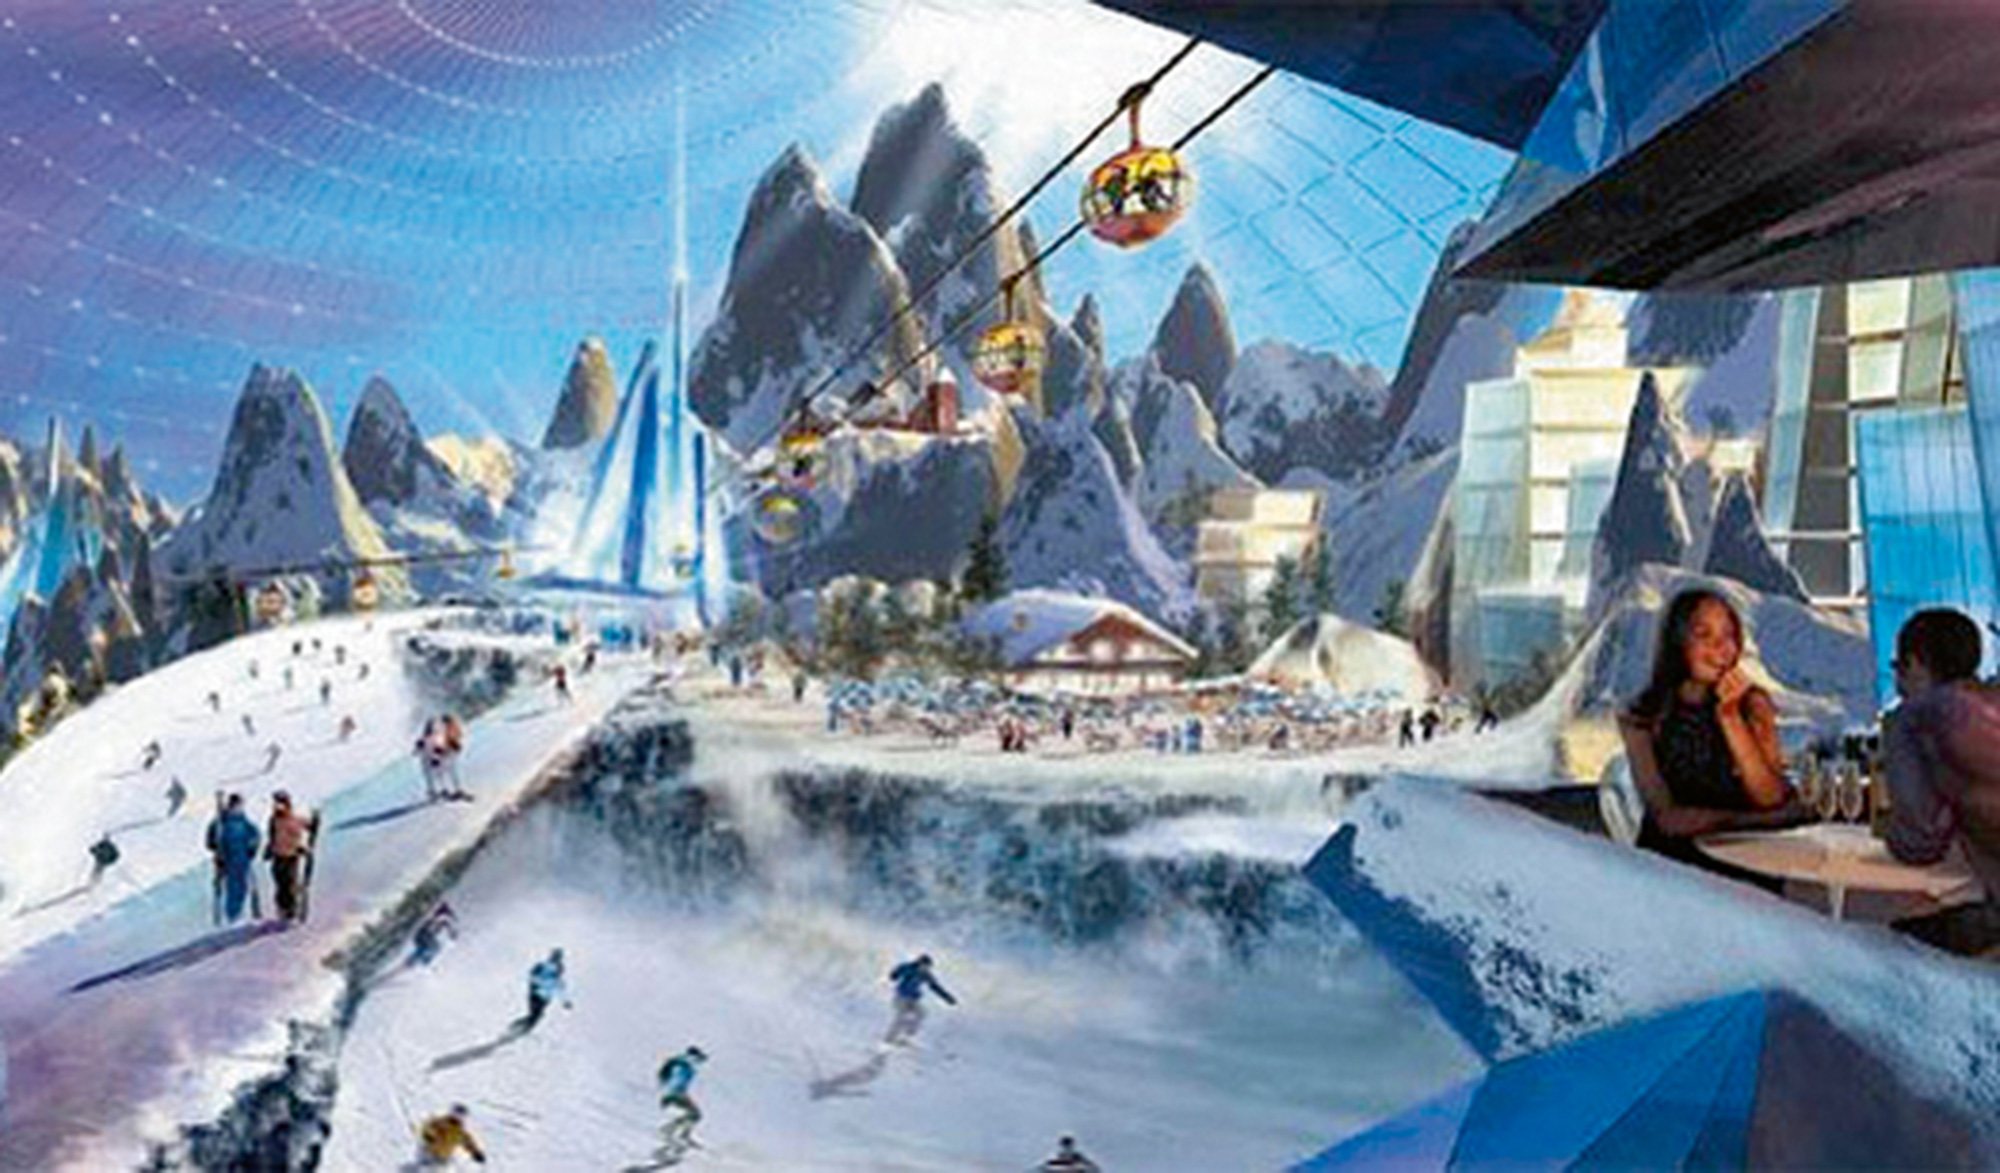 A promotional image from Dubai’s indefinitely postponed Sunny Mountain Ski Dome project.